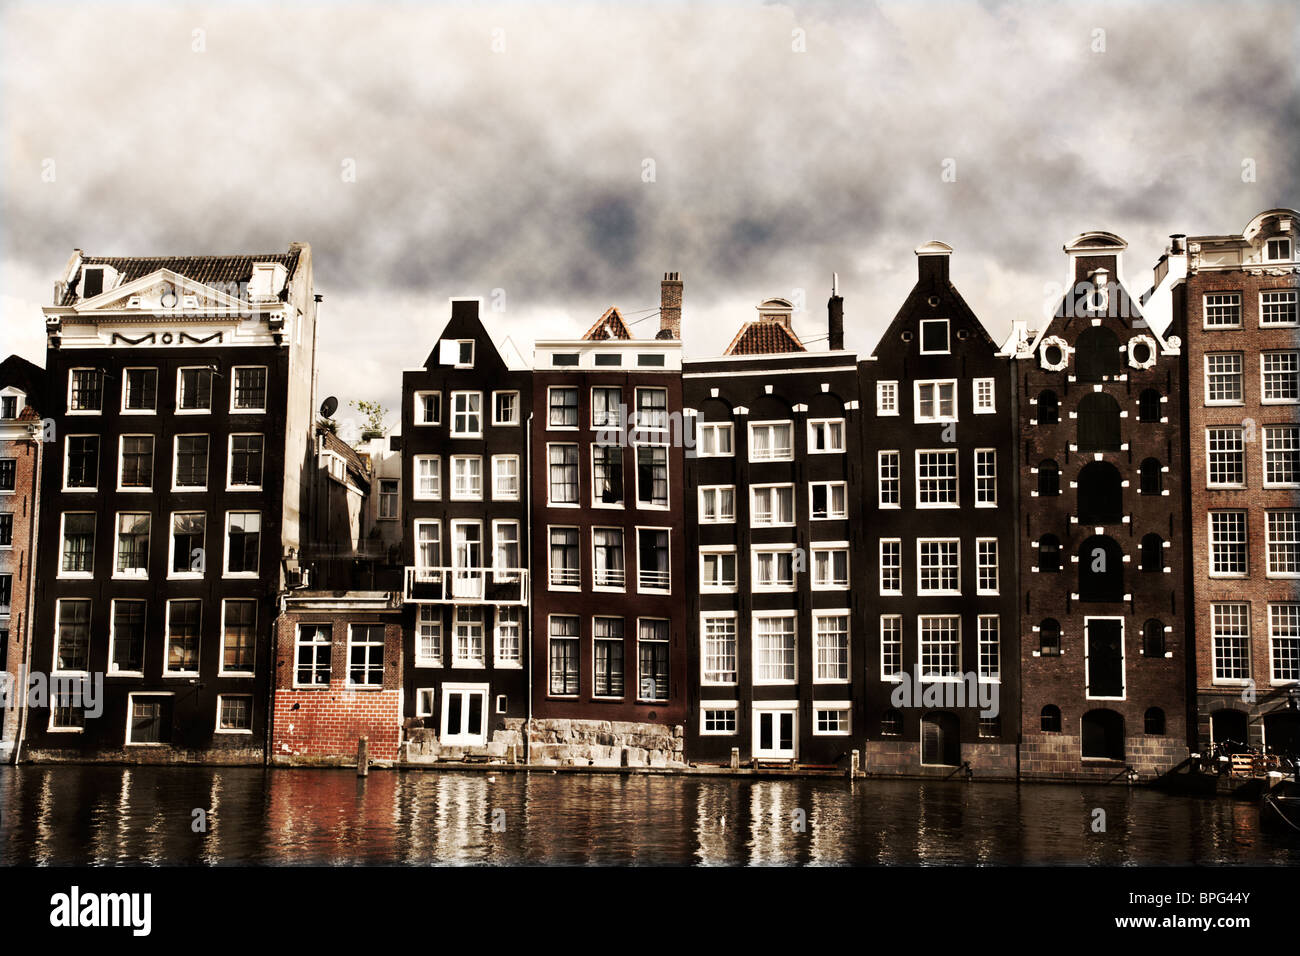 Amsterdam canal houses with a vintage sepia look Stock Photo